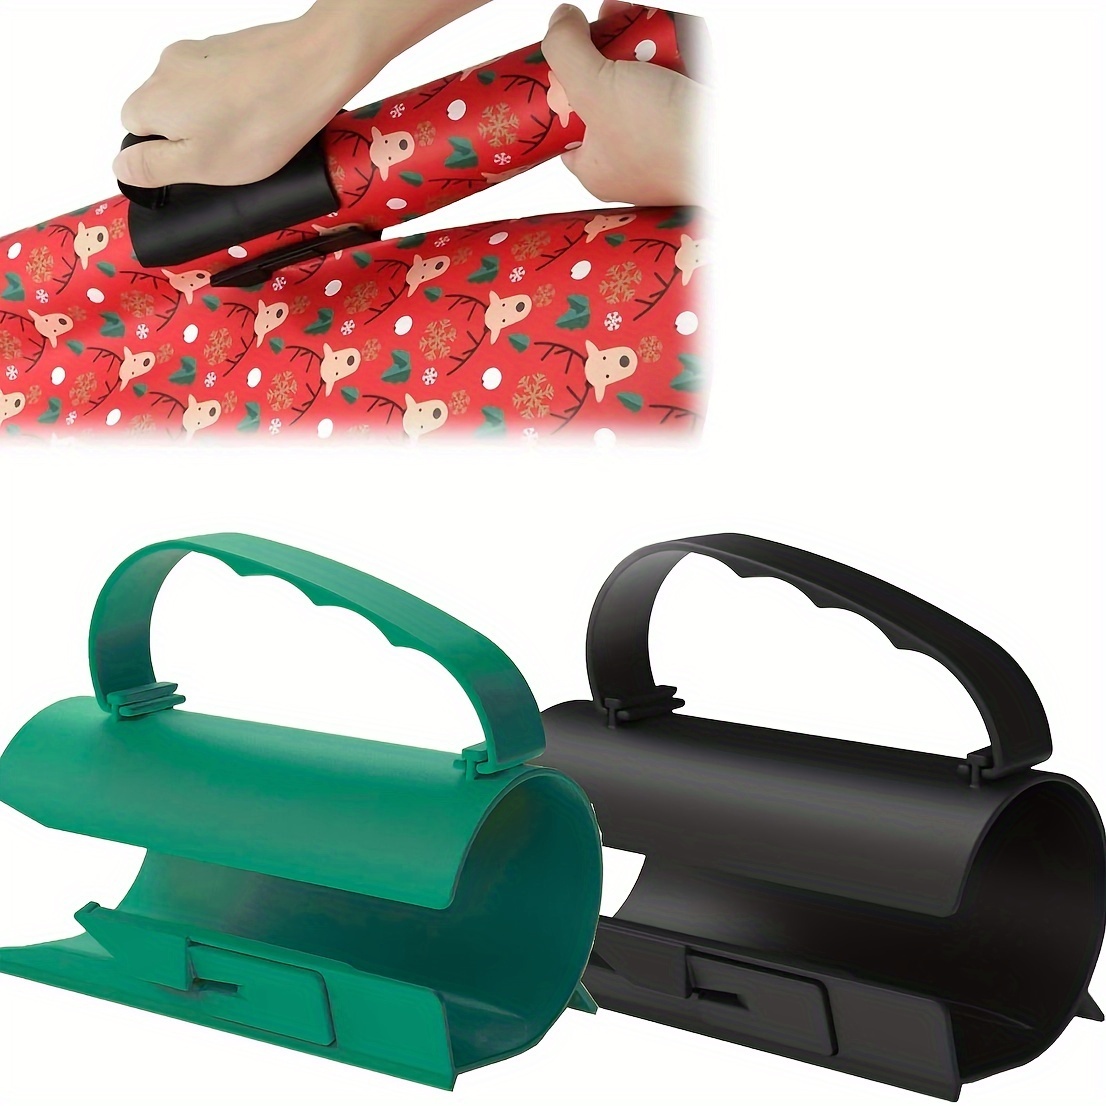 4PCS Tabletop Gift Wrapping Tool Tape Dispenser Paper Roll Holder